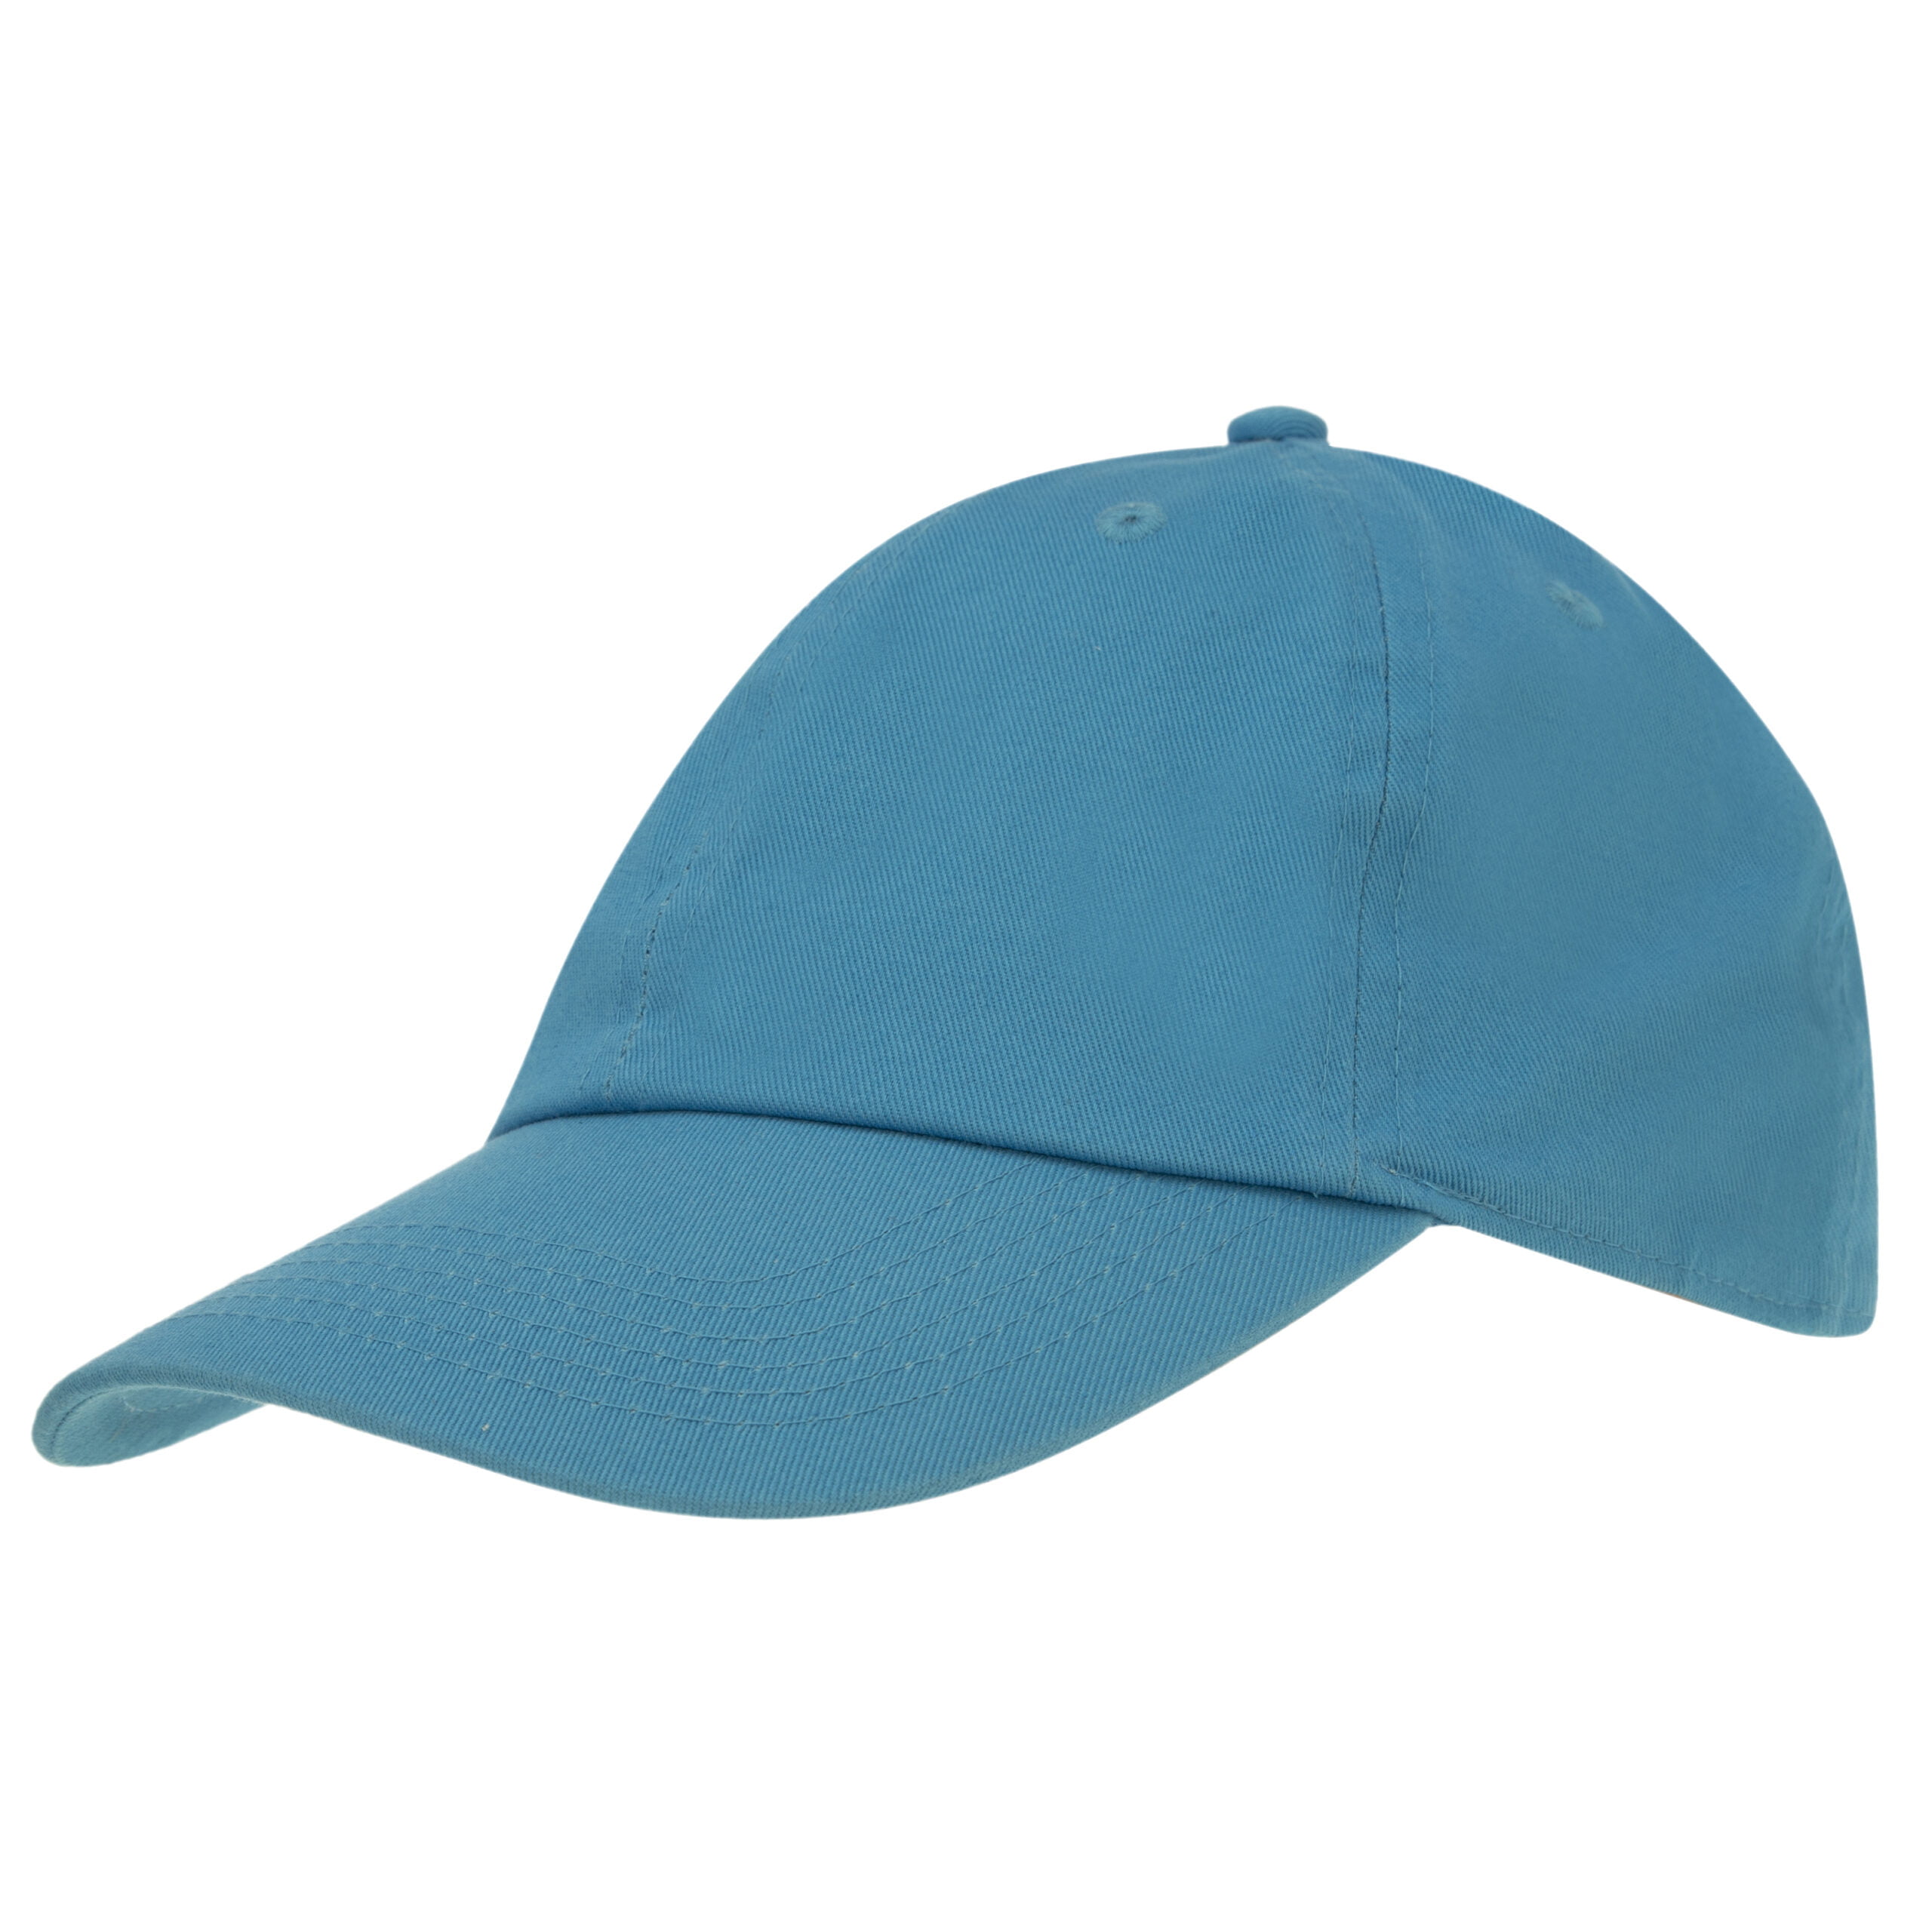 12pcs Turquoise Solid Baseball Hats Low Profile - Unconstructed - Adjustable Clasp - 100% Cotton - Stone Washed - Bulk by the Dozen - Wholesale